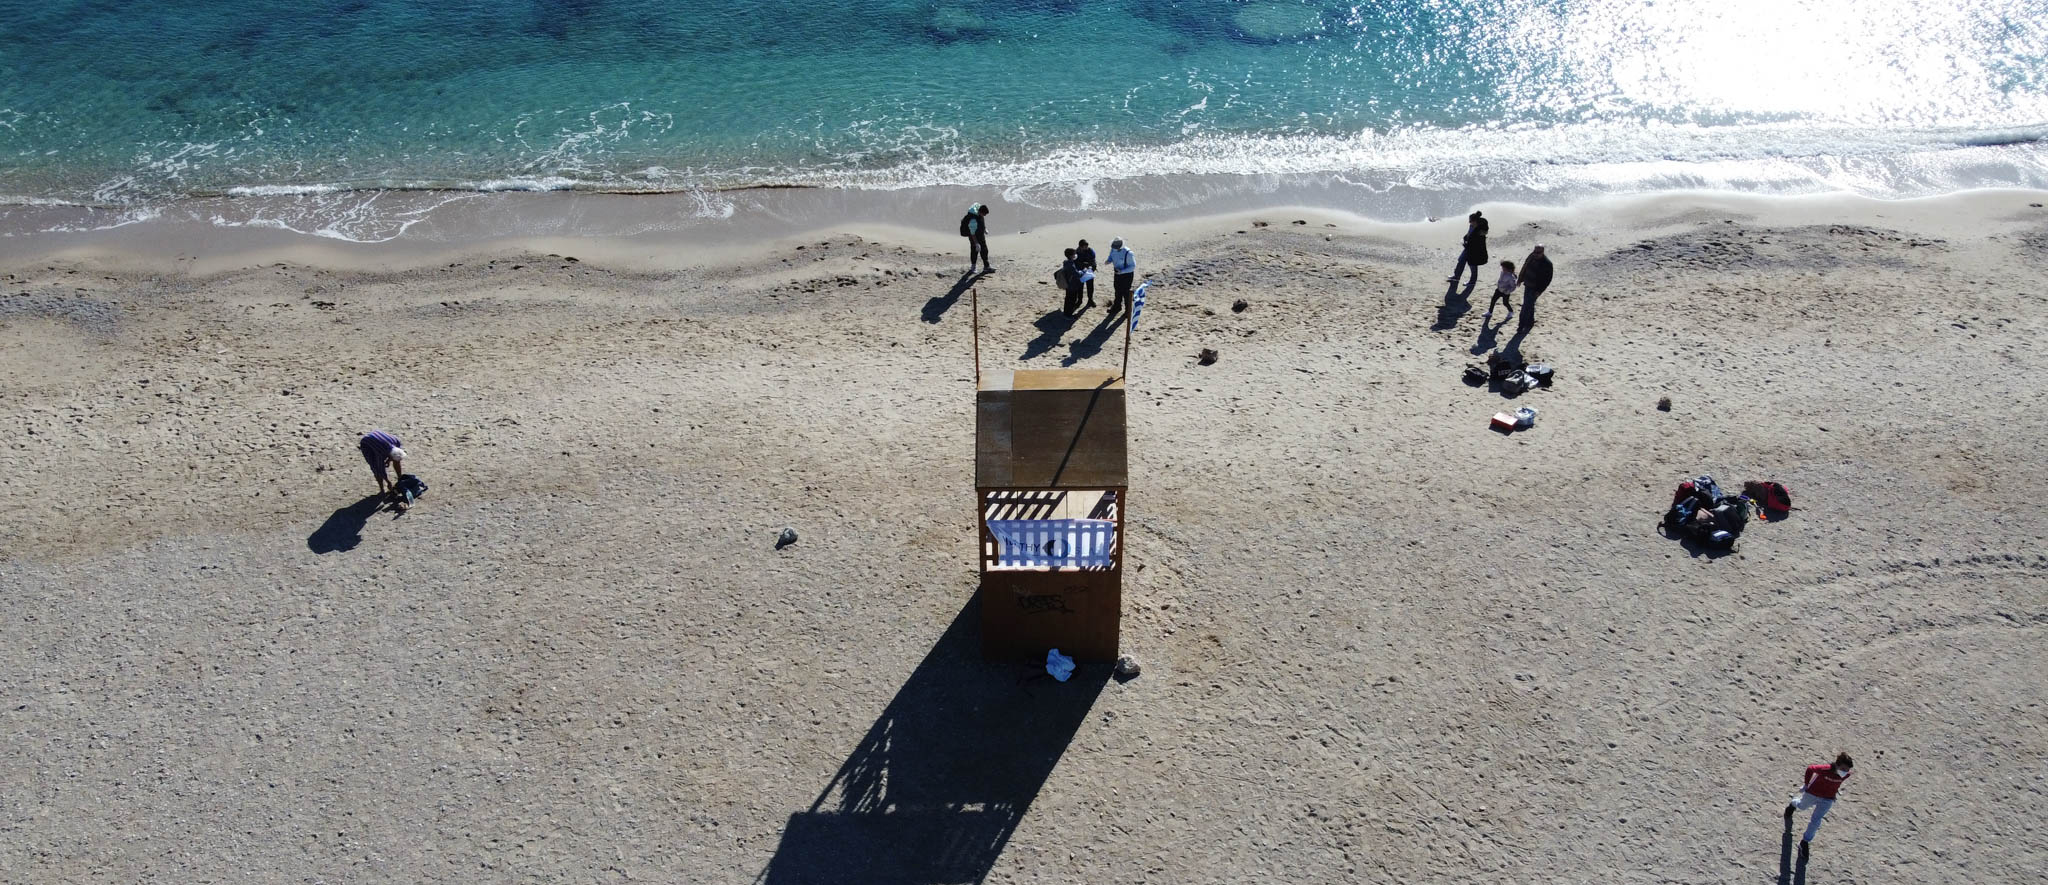 A gazebo on the beach on world fisheries day